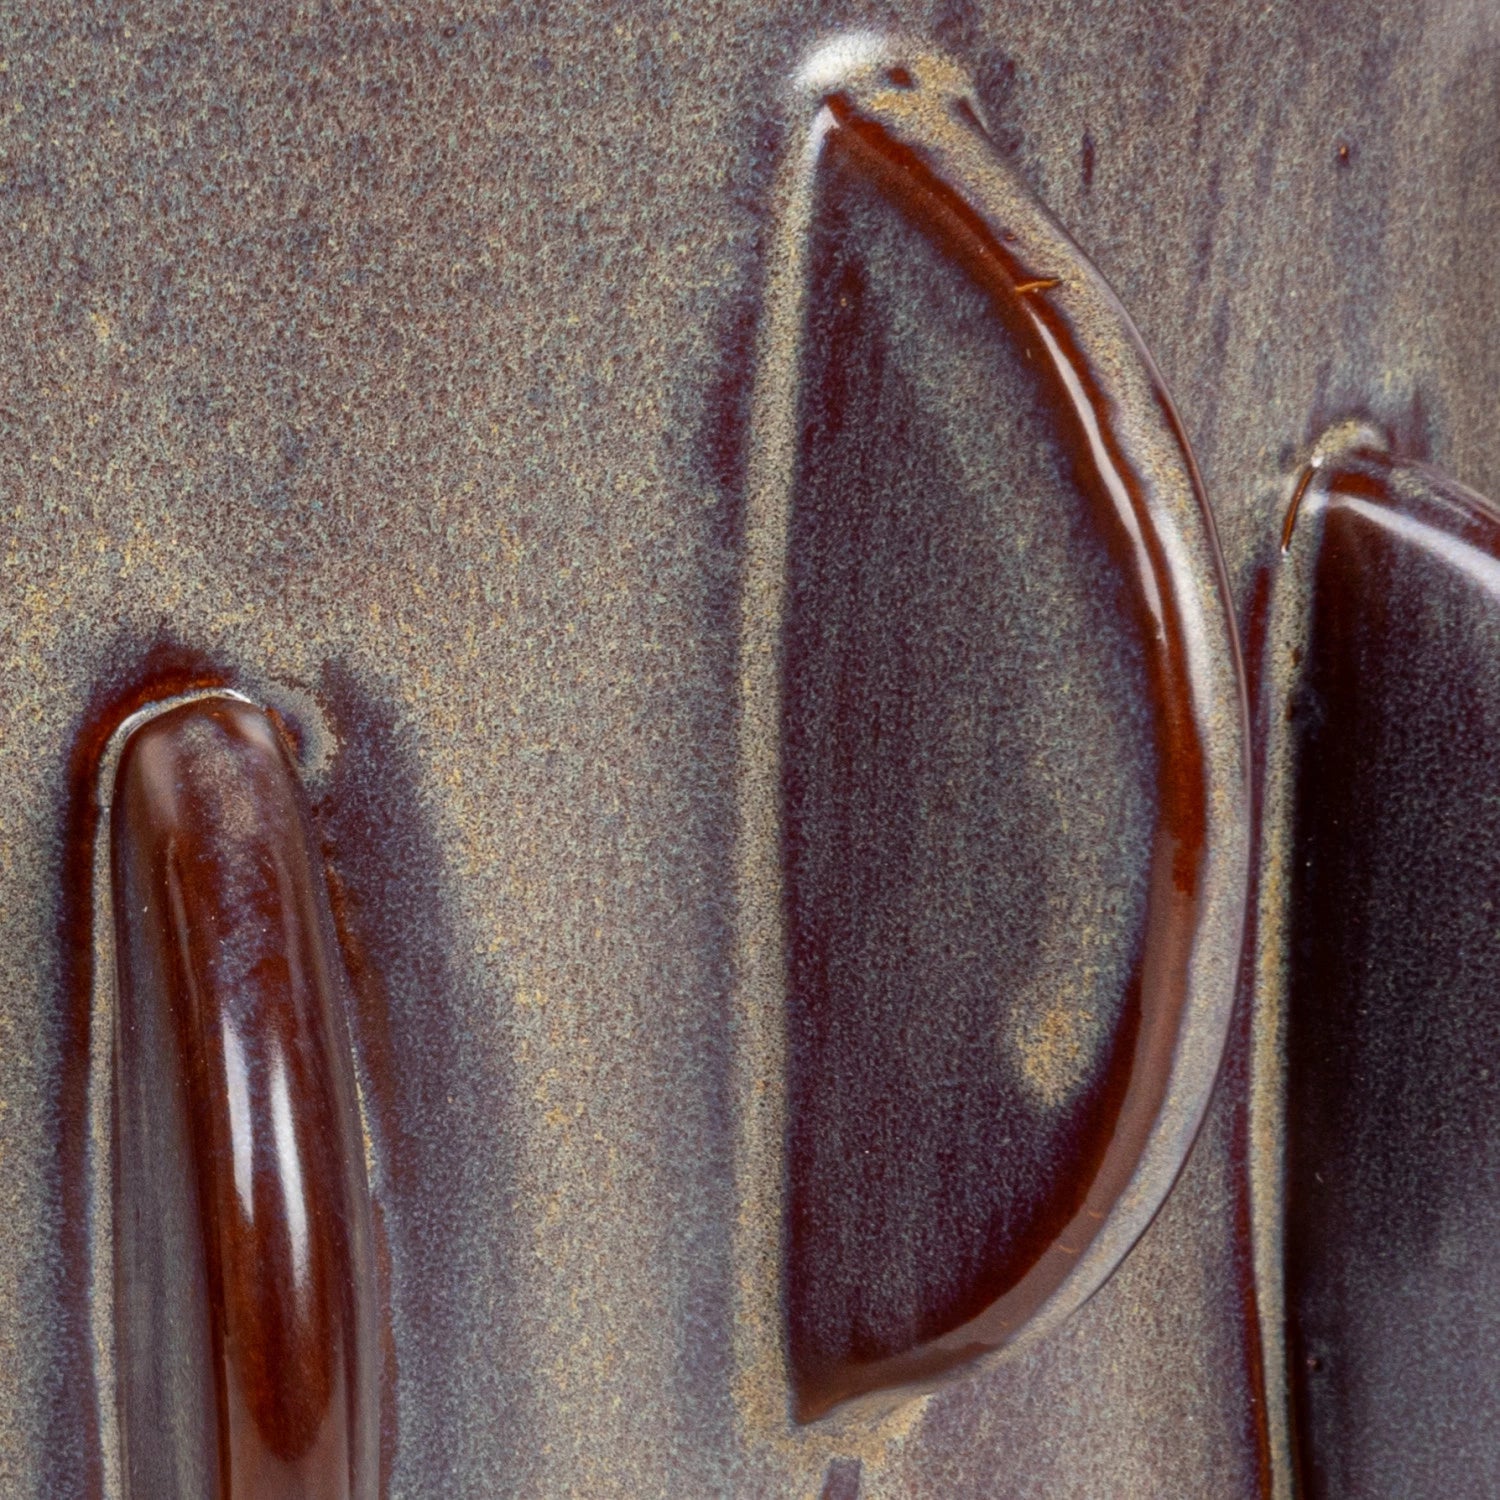 Close-up image of a weathered metallic surface showing rust and distinct dark lines resembling abstract shapes, possibly part of a larger metal structure in Scottsdale, Arizona.